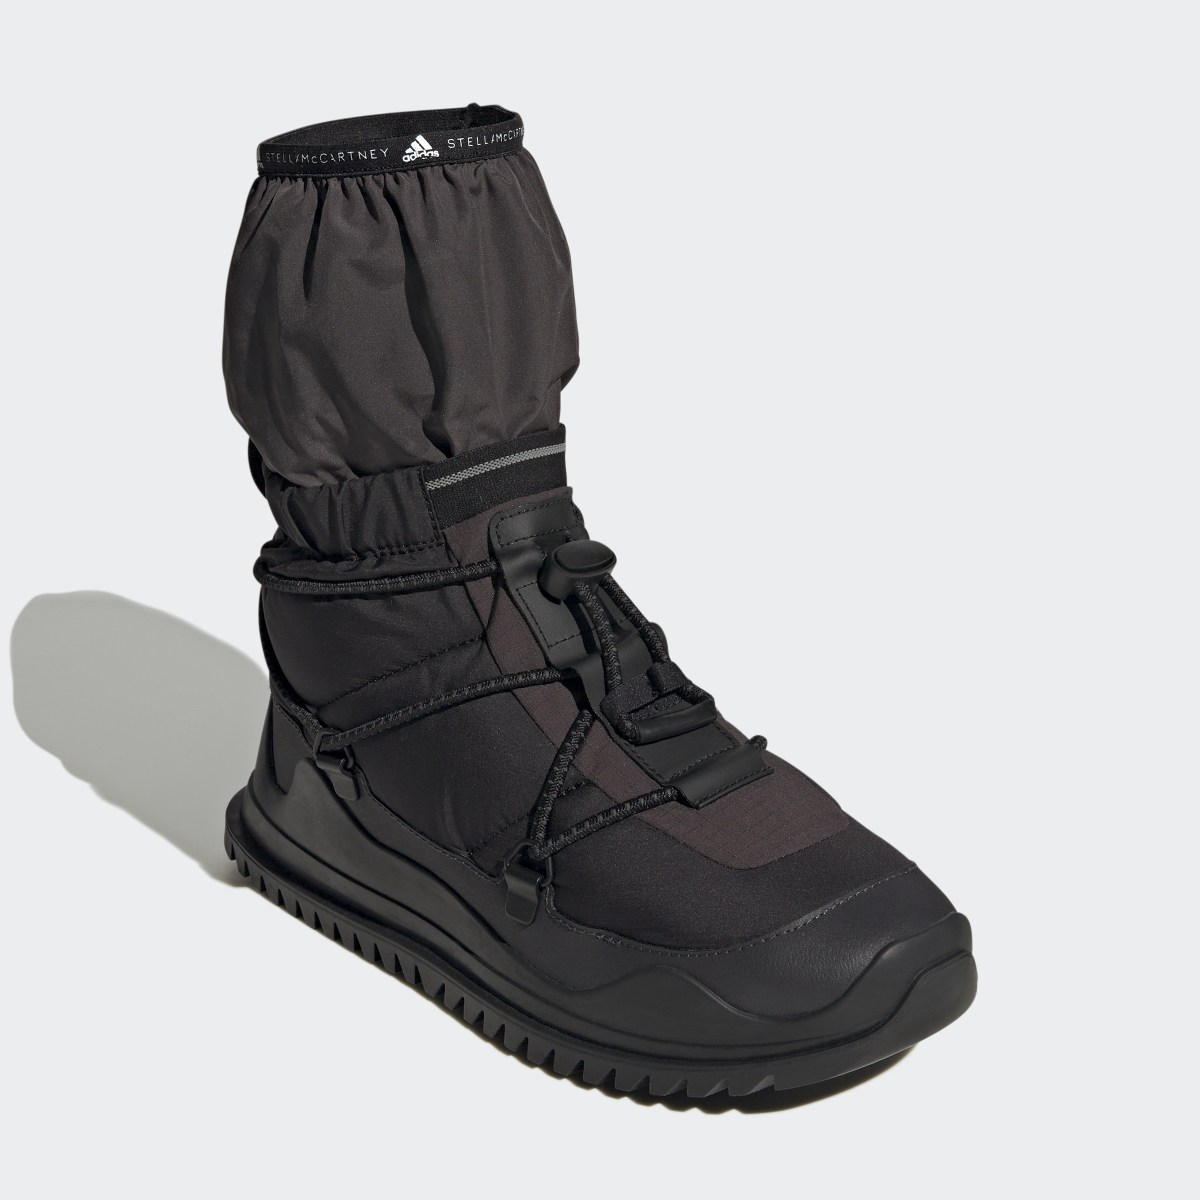 Adidas by Stella McCartney Winter COLD.RDY Boot. 5